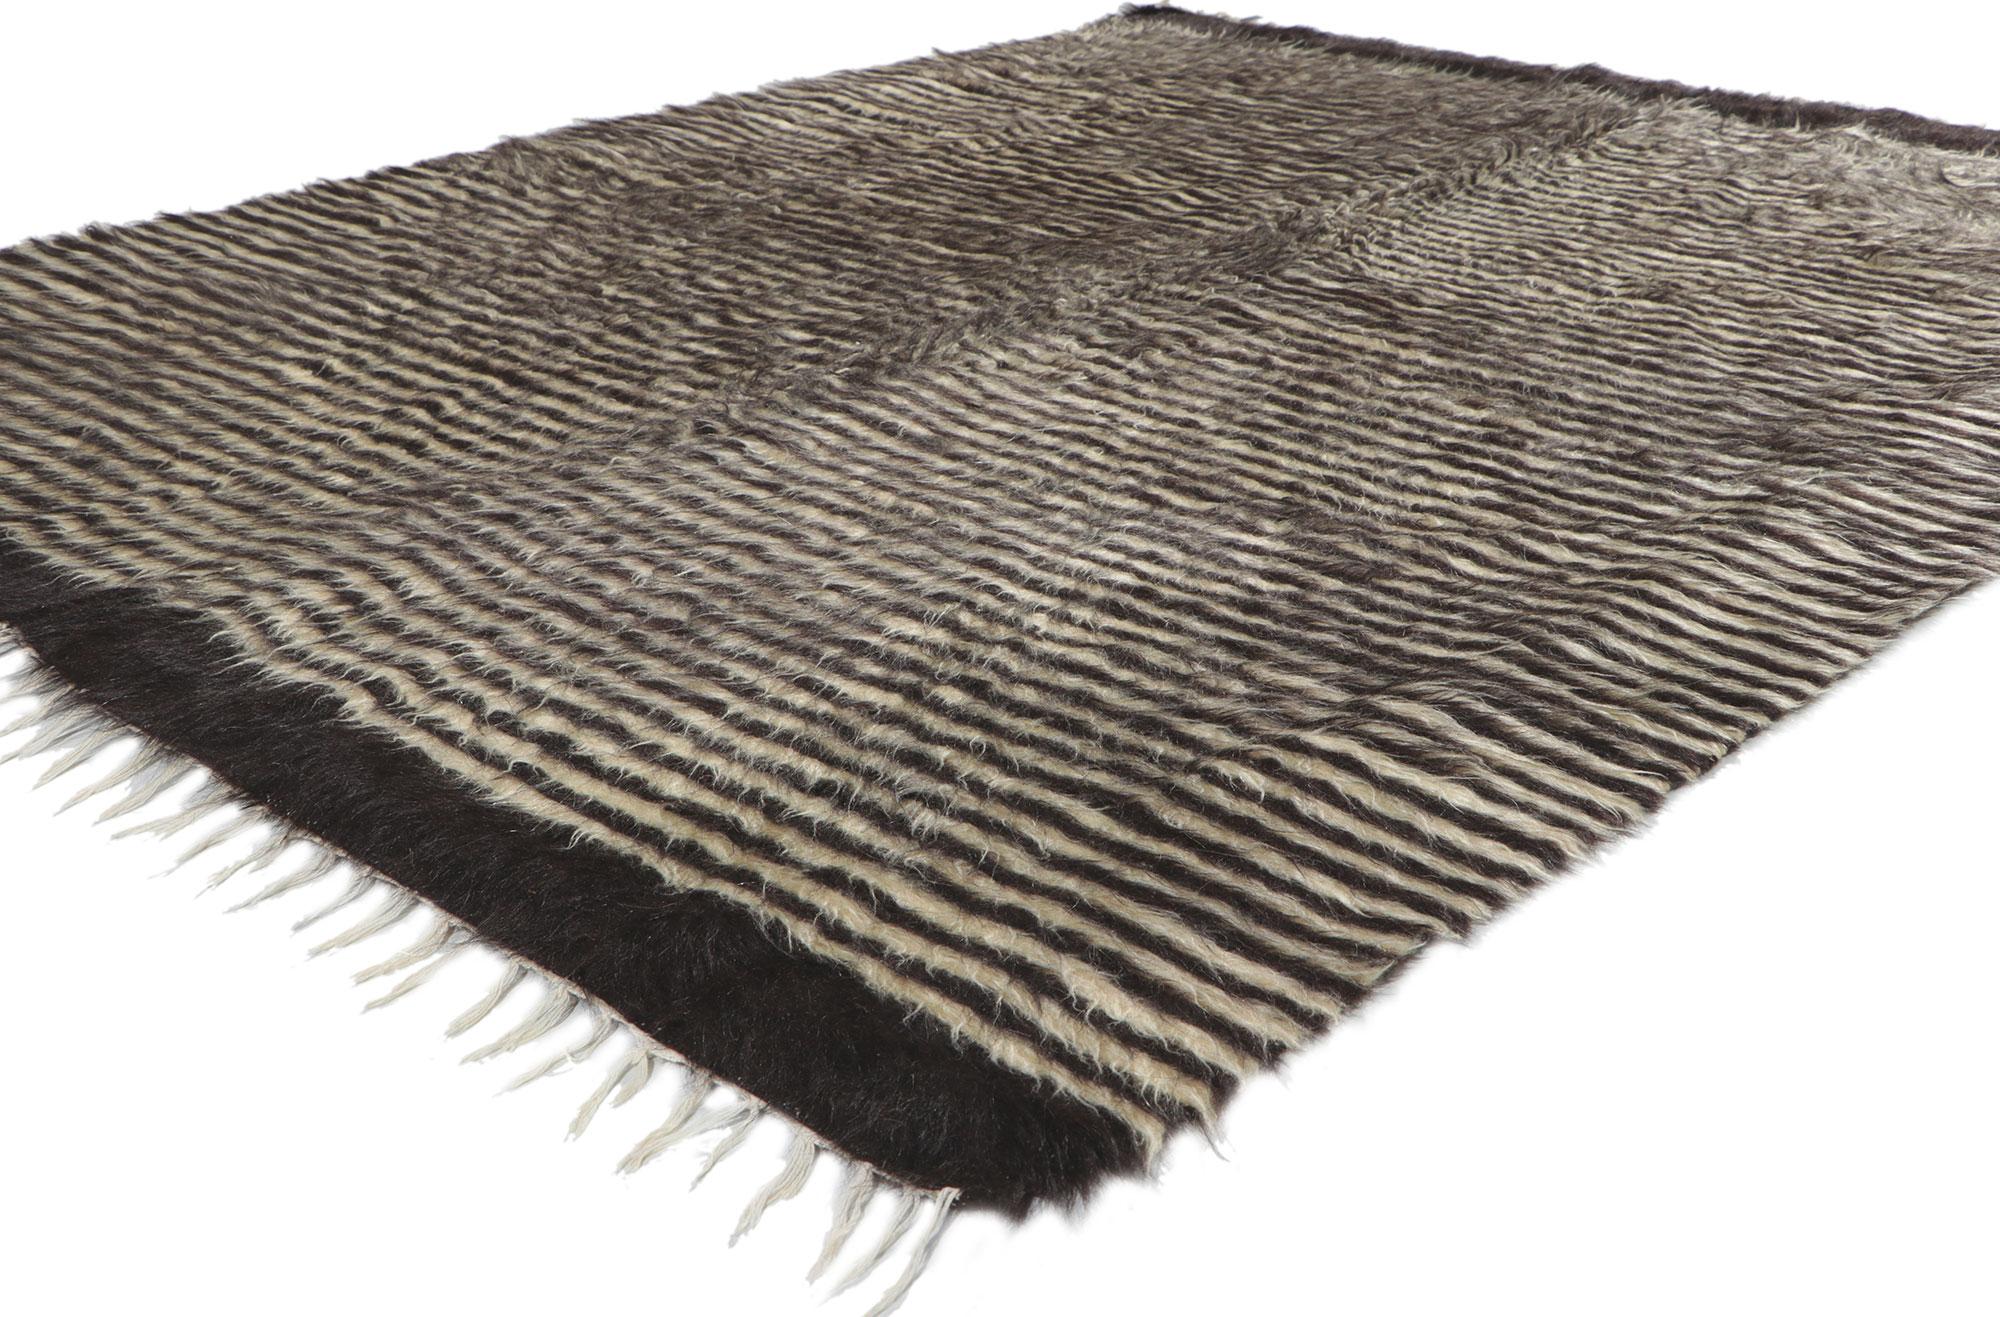 53847 Vintage turkish angora wool kilim blanket Rug, maesure: 05' 03 x 06' 07. With its shaggy pile, incredible detail and texture, this handwoven turkish angora kilim rug is a captivating vision of woven beauty. The eye-catching striped pattern and